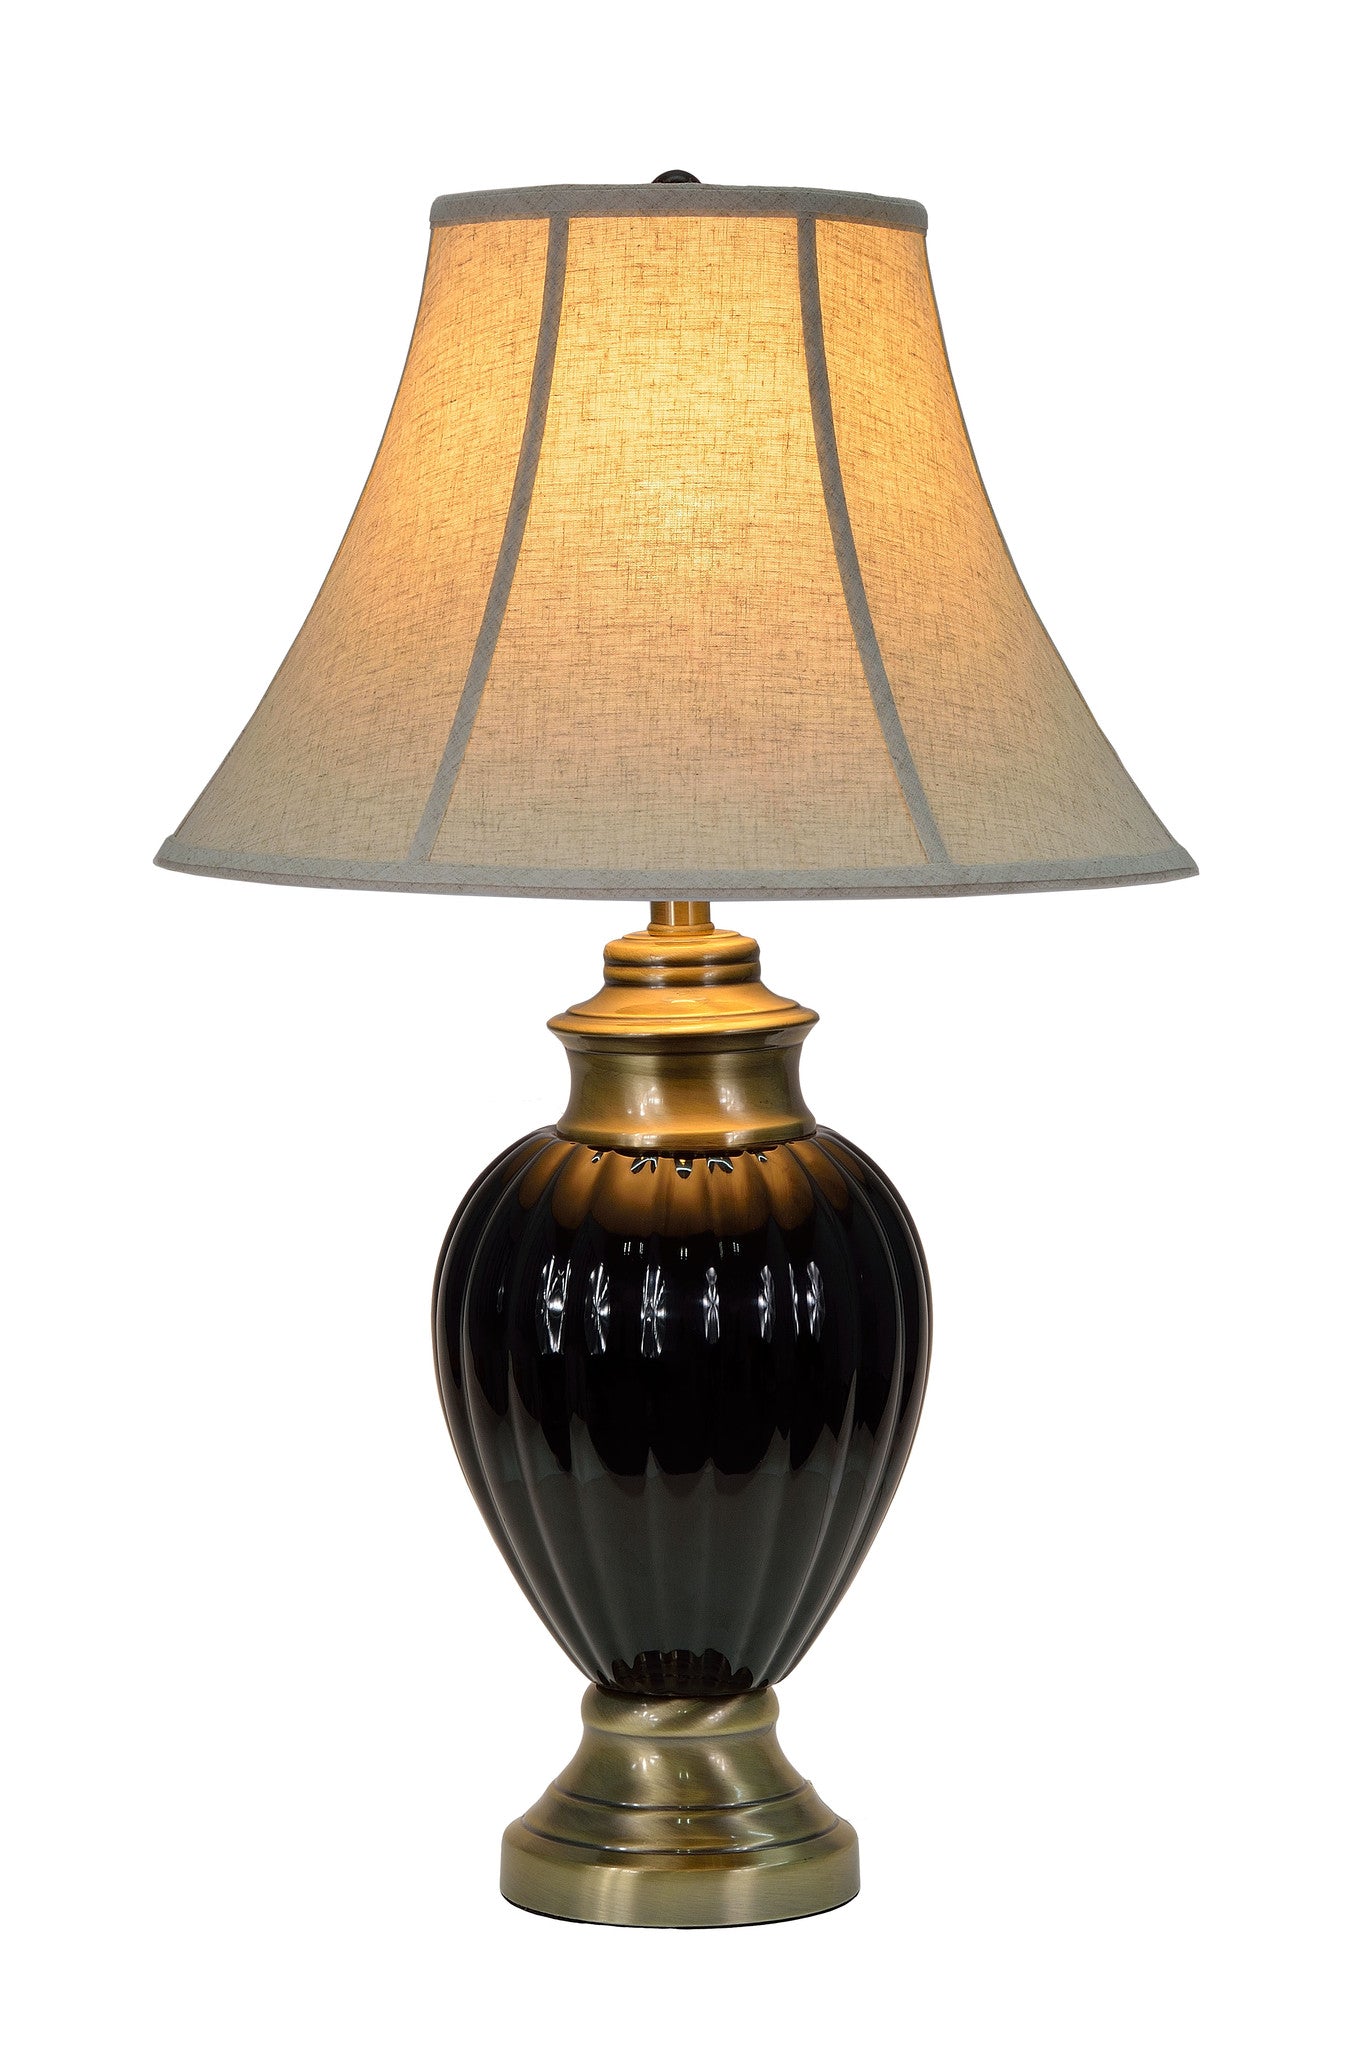 40011, 29 High Traditional Ceramic Table Lamp, Black with Antique